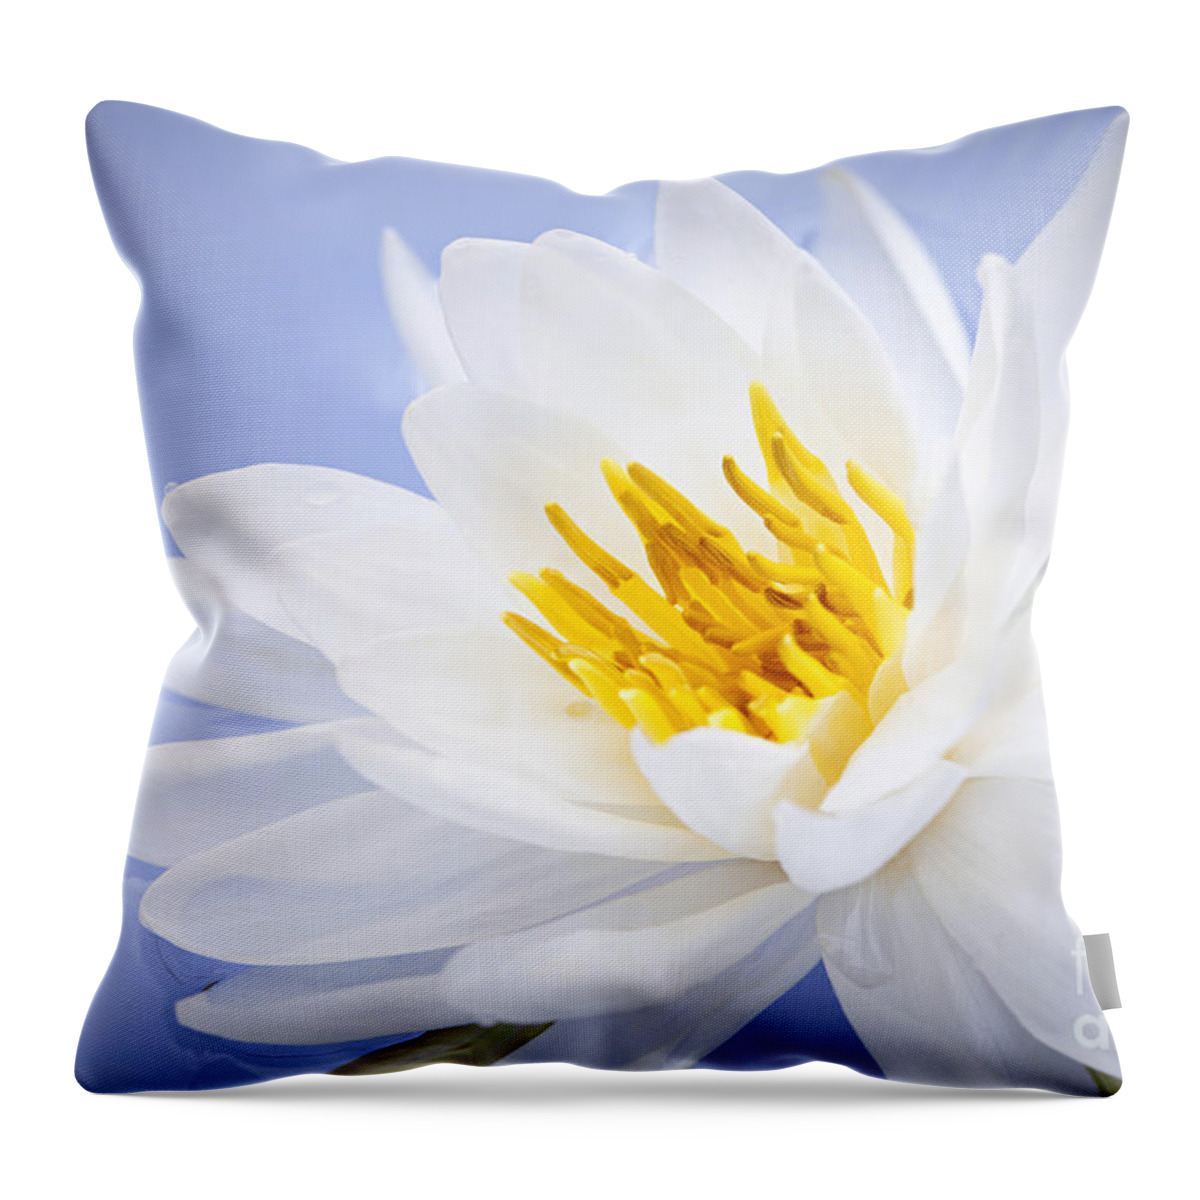 Lotus Throw Pillow featuring the photograph Lotus flower 2 by Elena Elisseeva